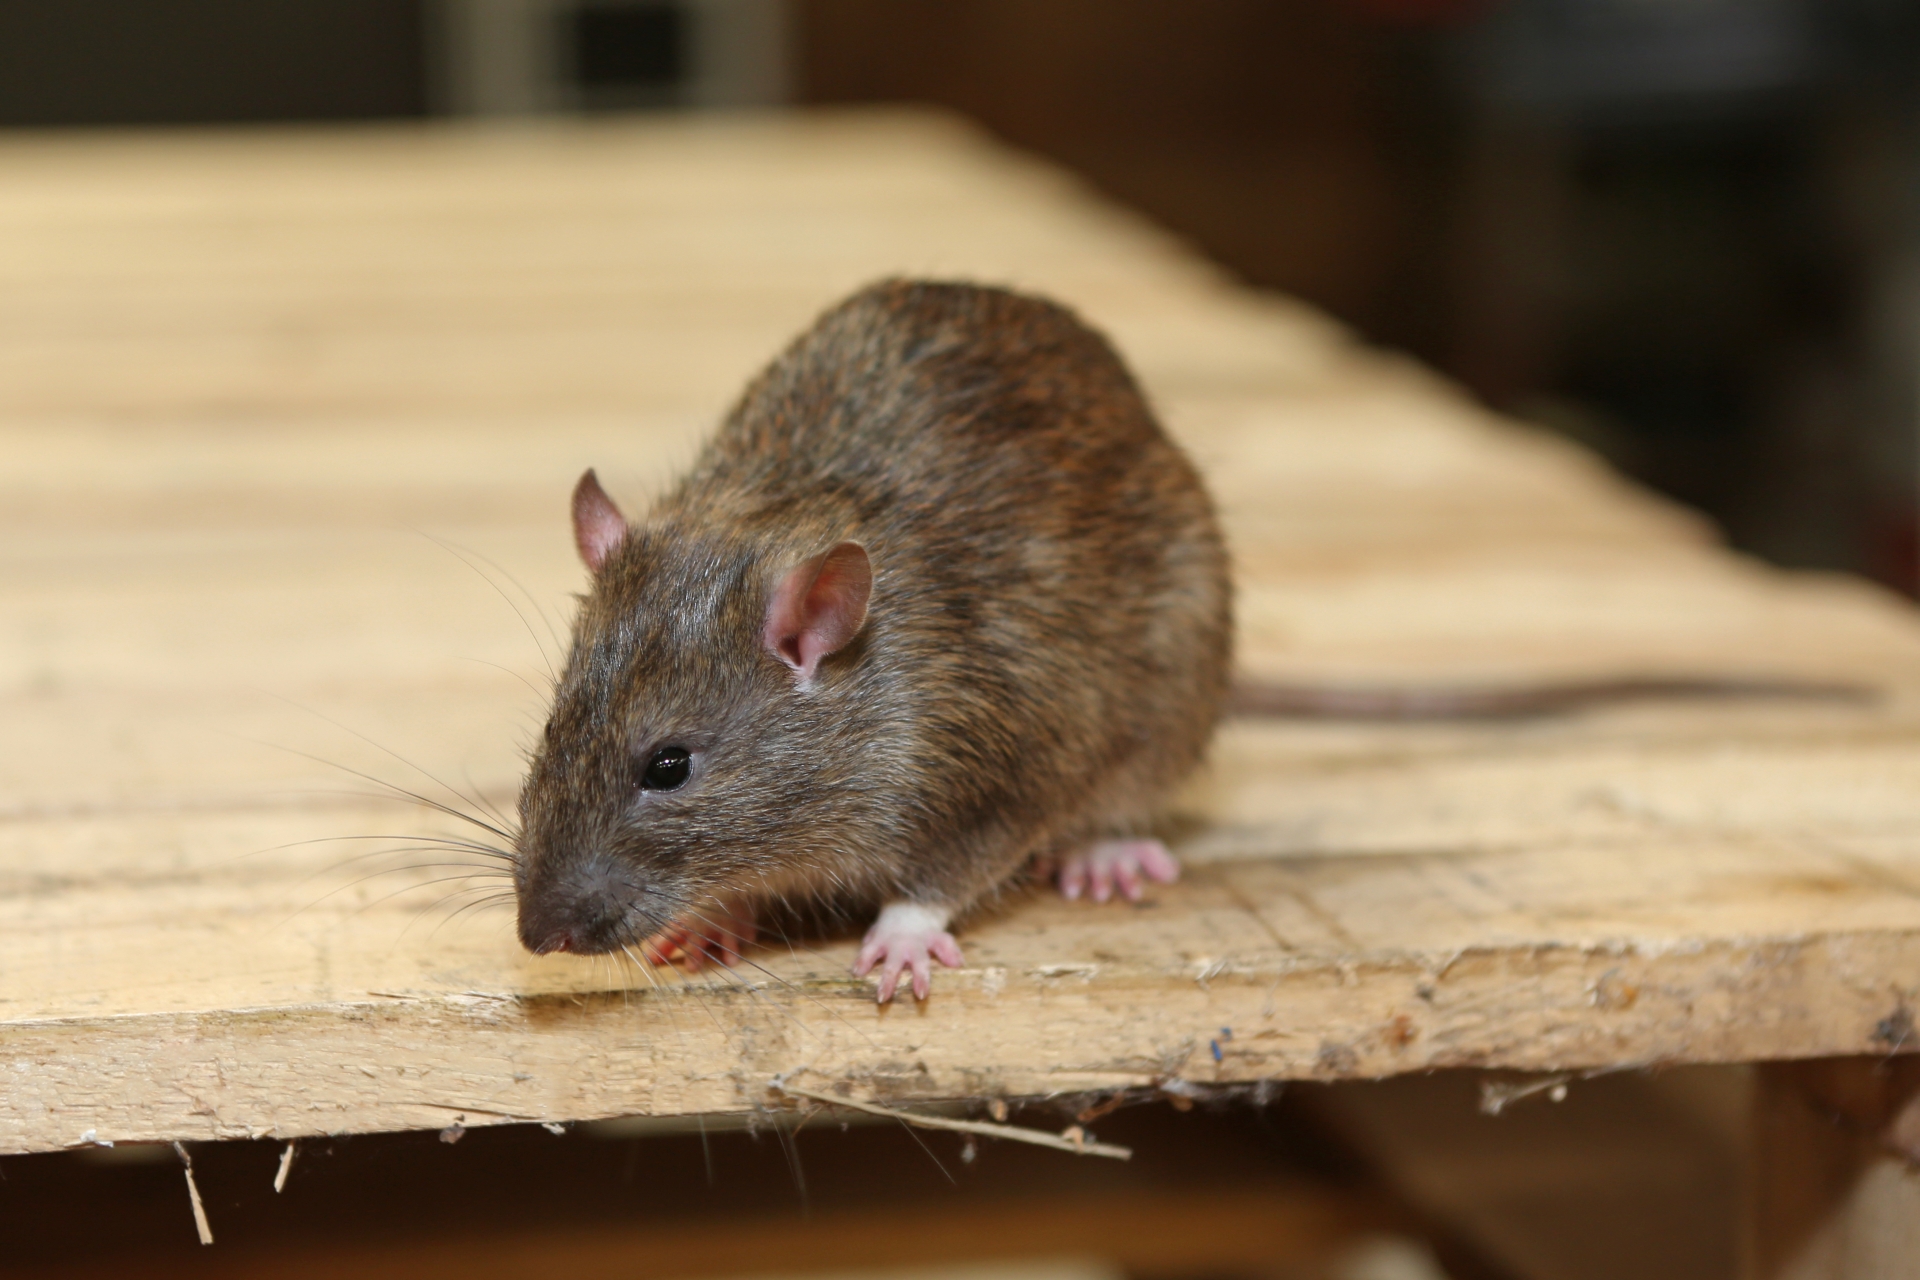 Rat extermination, Pest Control in Borehamwood, Elstree, Well End, WD6. Call Now 020 8166 9746